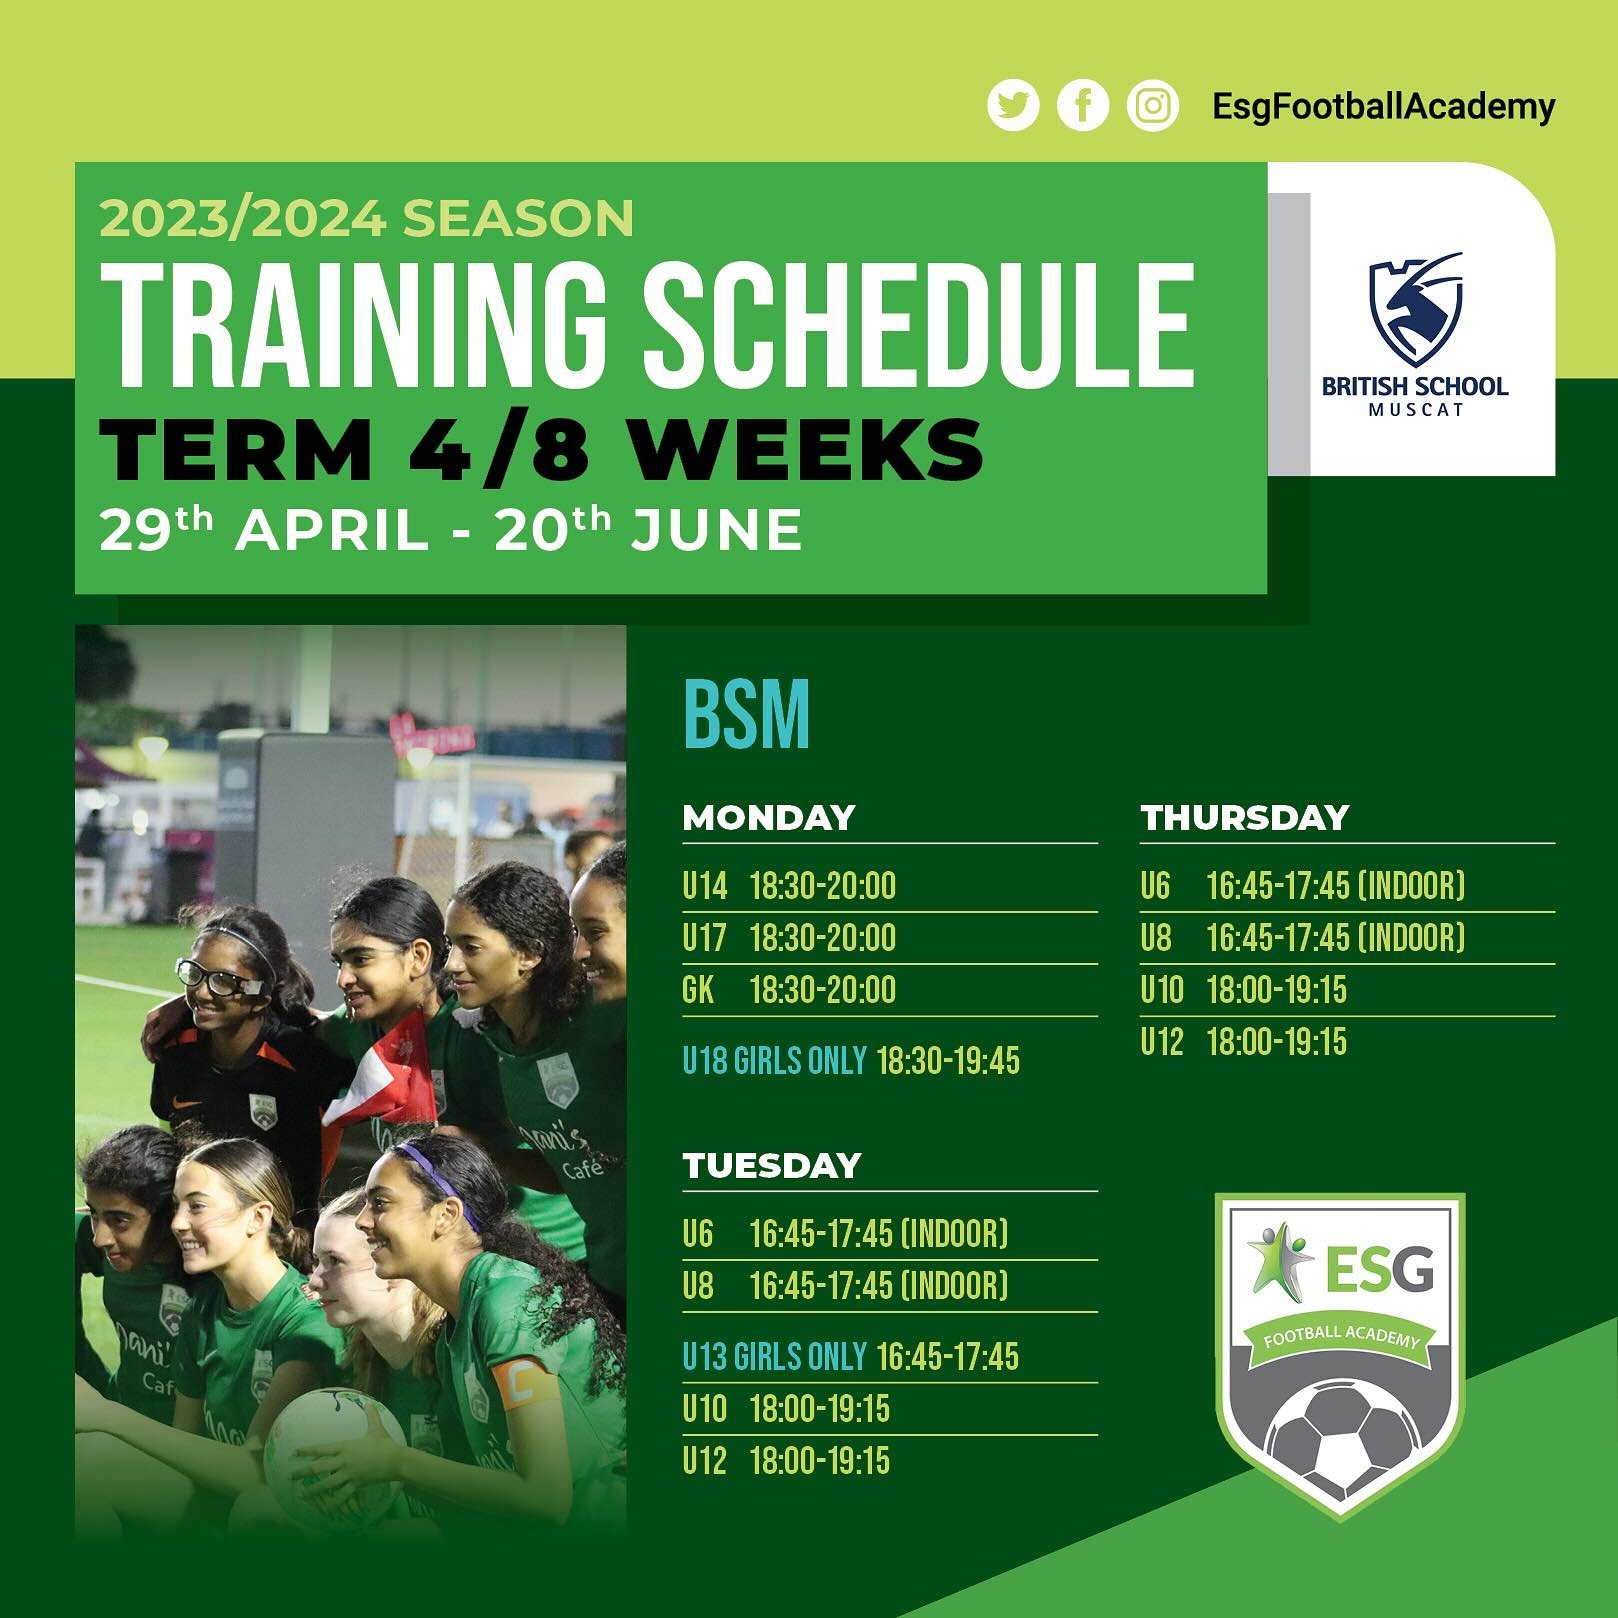 ESG Football Academy Term 4 registration is now open and ready for you to book your place.

As always registration is first come first serve.

Due to the increase in temperature, kindly note that all our younger age groups will be Indoor sessions and